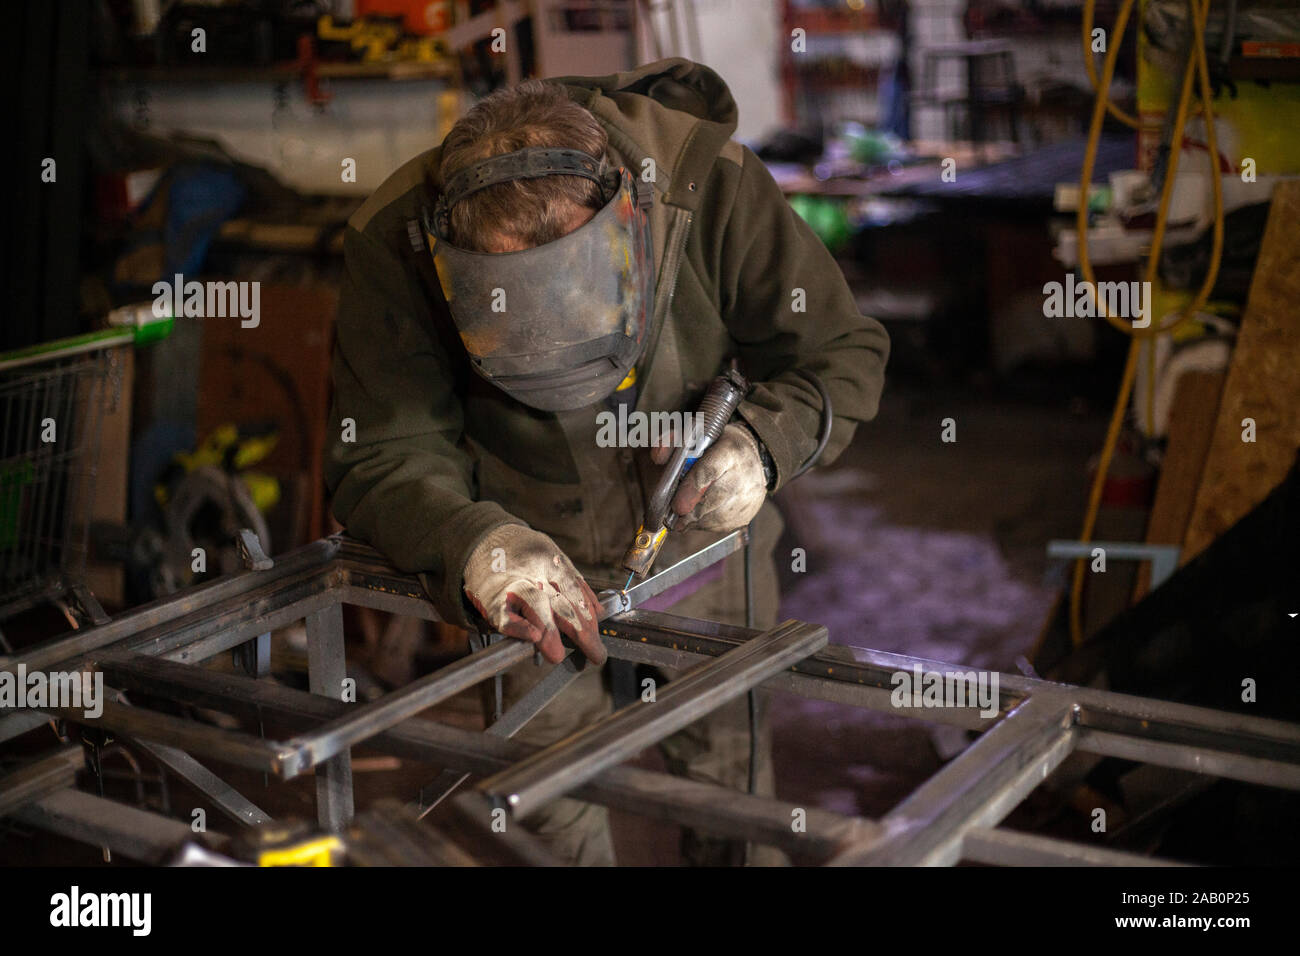 Metal welding in a workshop. A masked welder is working on a part. Creating reliable adhesion of materials. Hot metal melts when exposed to temperatur Stock Photo